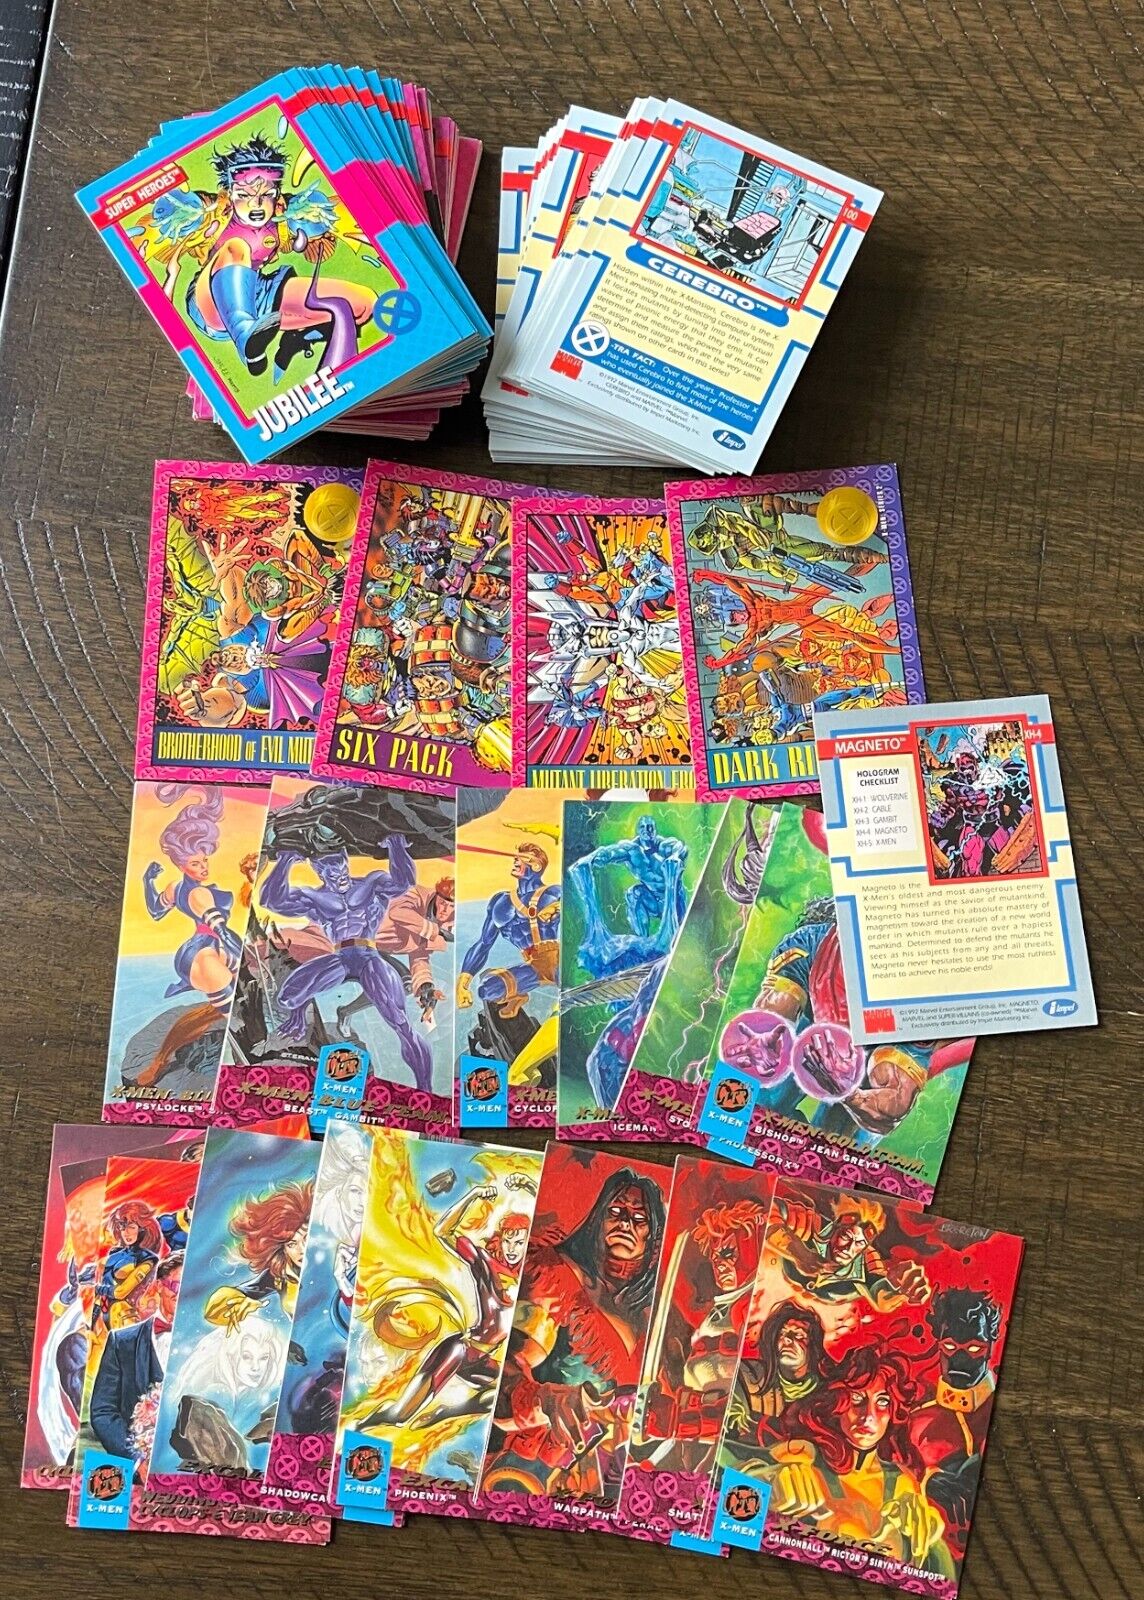 X-Men trading cards 1992 Impel, Fleer Ultras, 1 holo and more Lot of 155 Cards